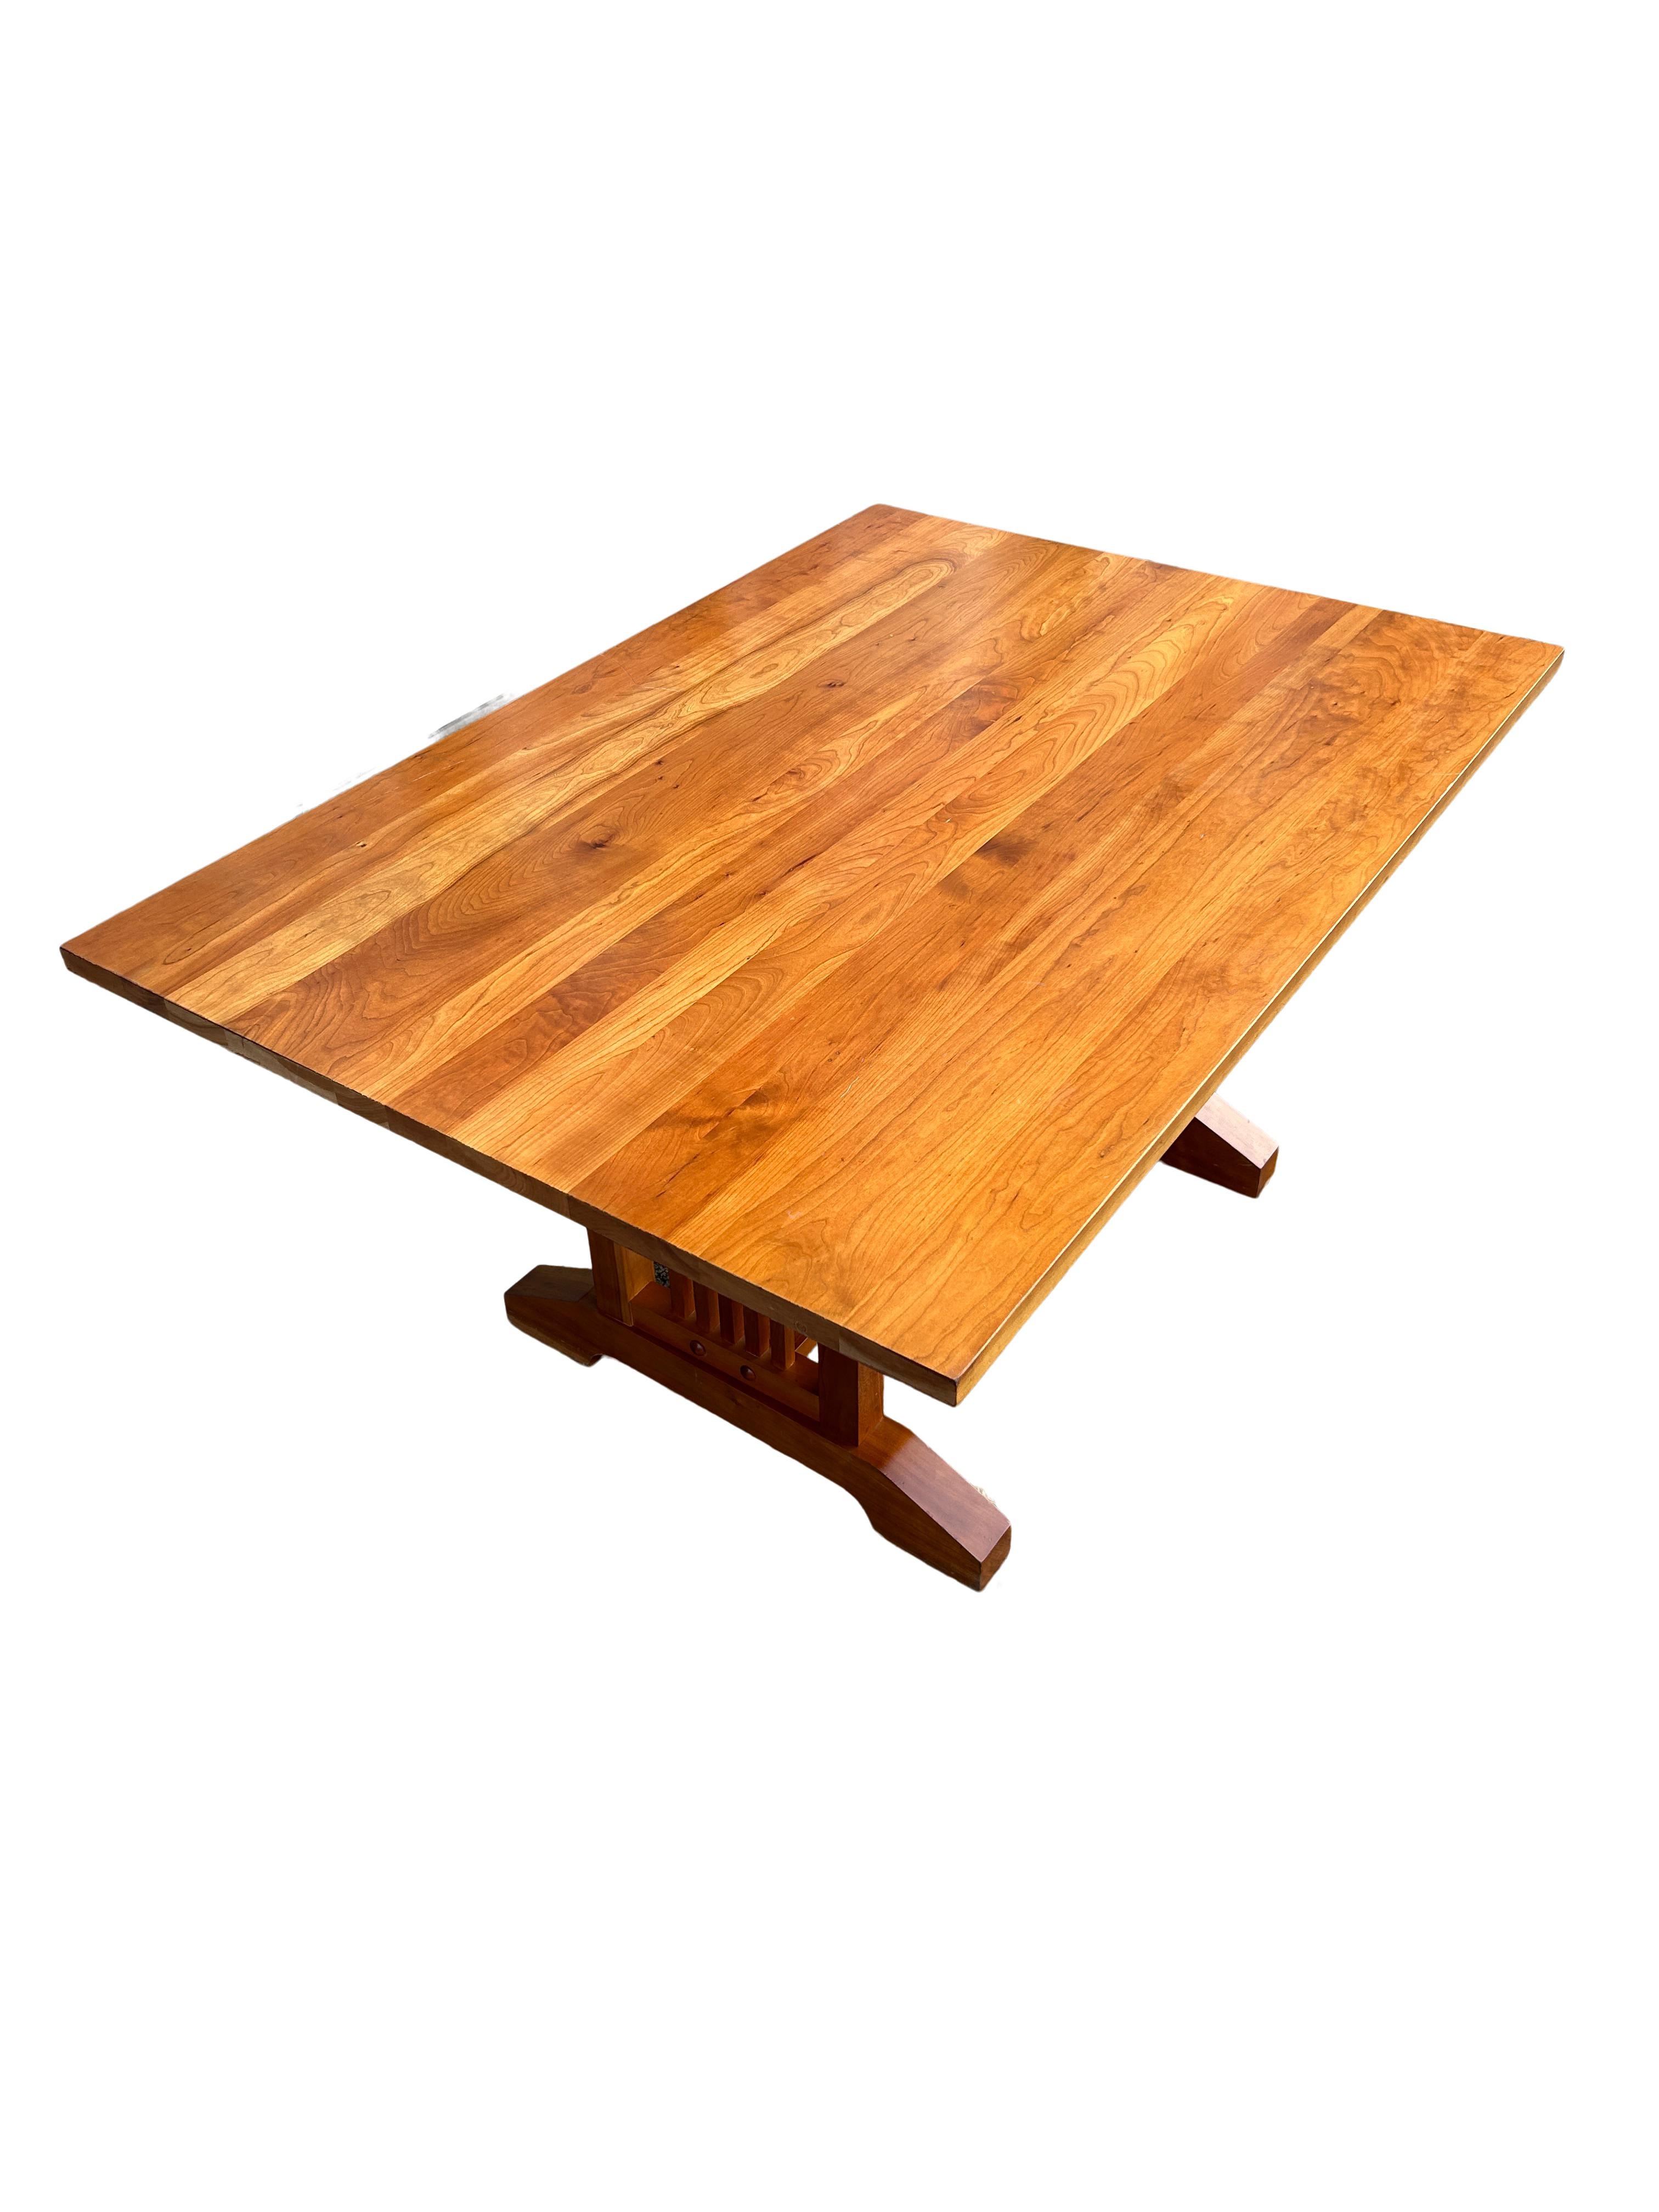 American Mid-Century Studio Craft Solid Cherry Dining Table Mission Trestle Style For Sale